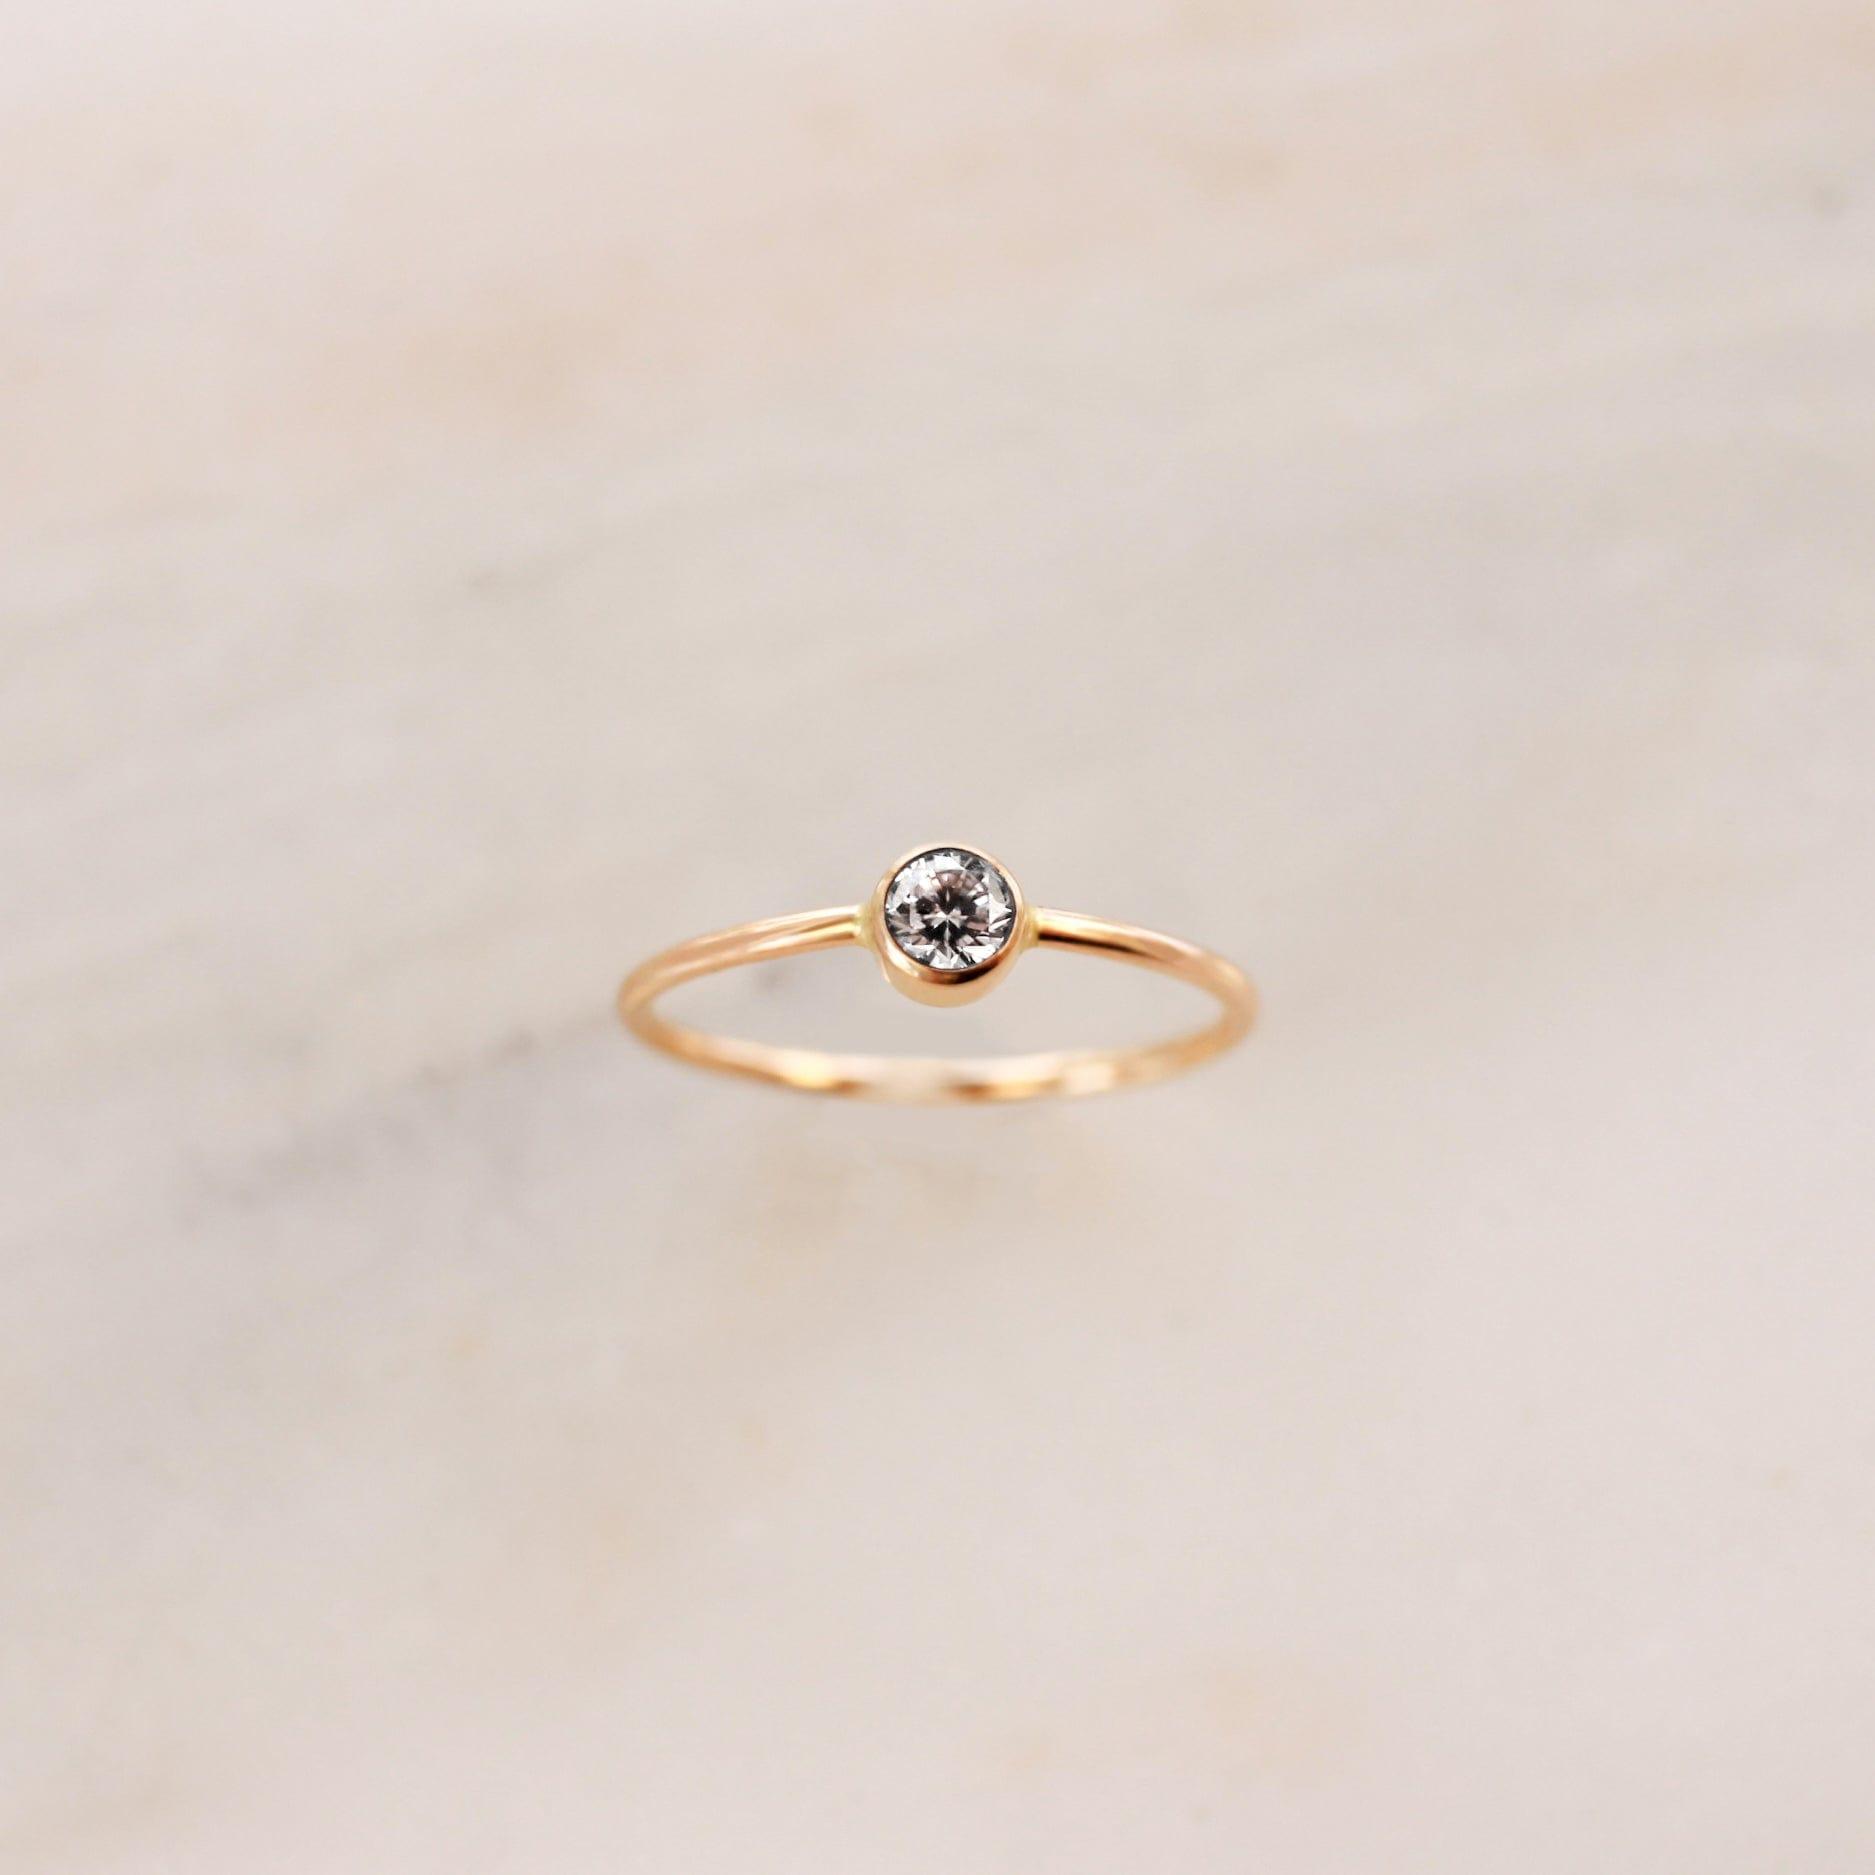 April Birthstone Ring ∙ Cubic Zirconia - Nolia Jewelry - Meaningful + Sustainably Handcrafted Jewelry